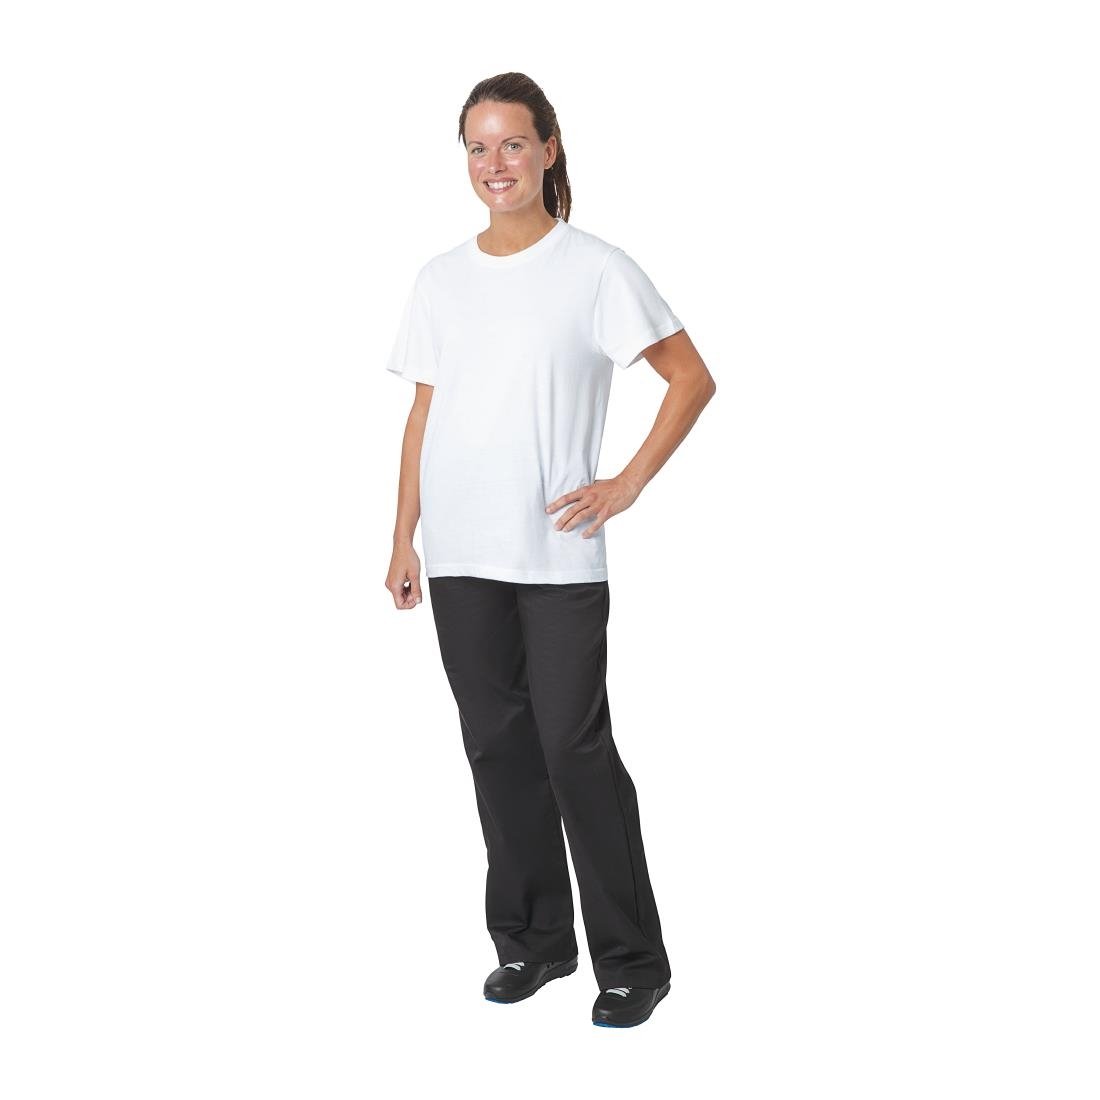 A103-S Unisex Chef T-Shirt White S JD Catering Equipment Solutions Ltd